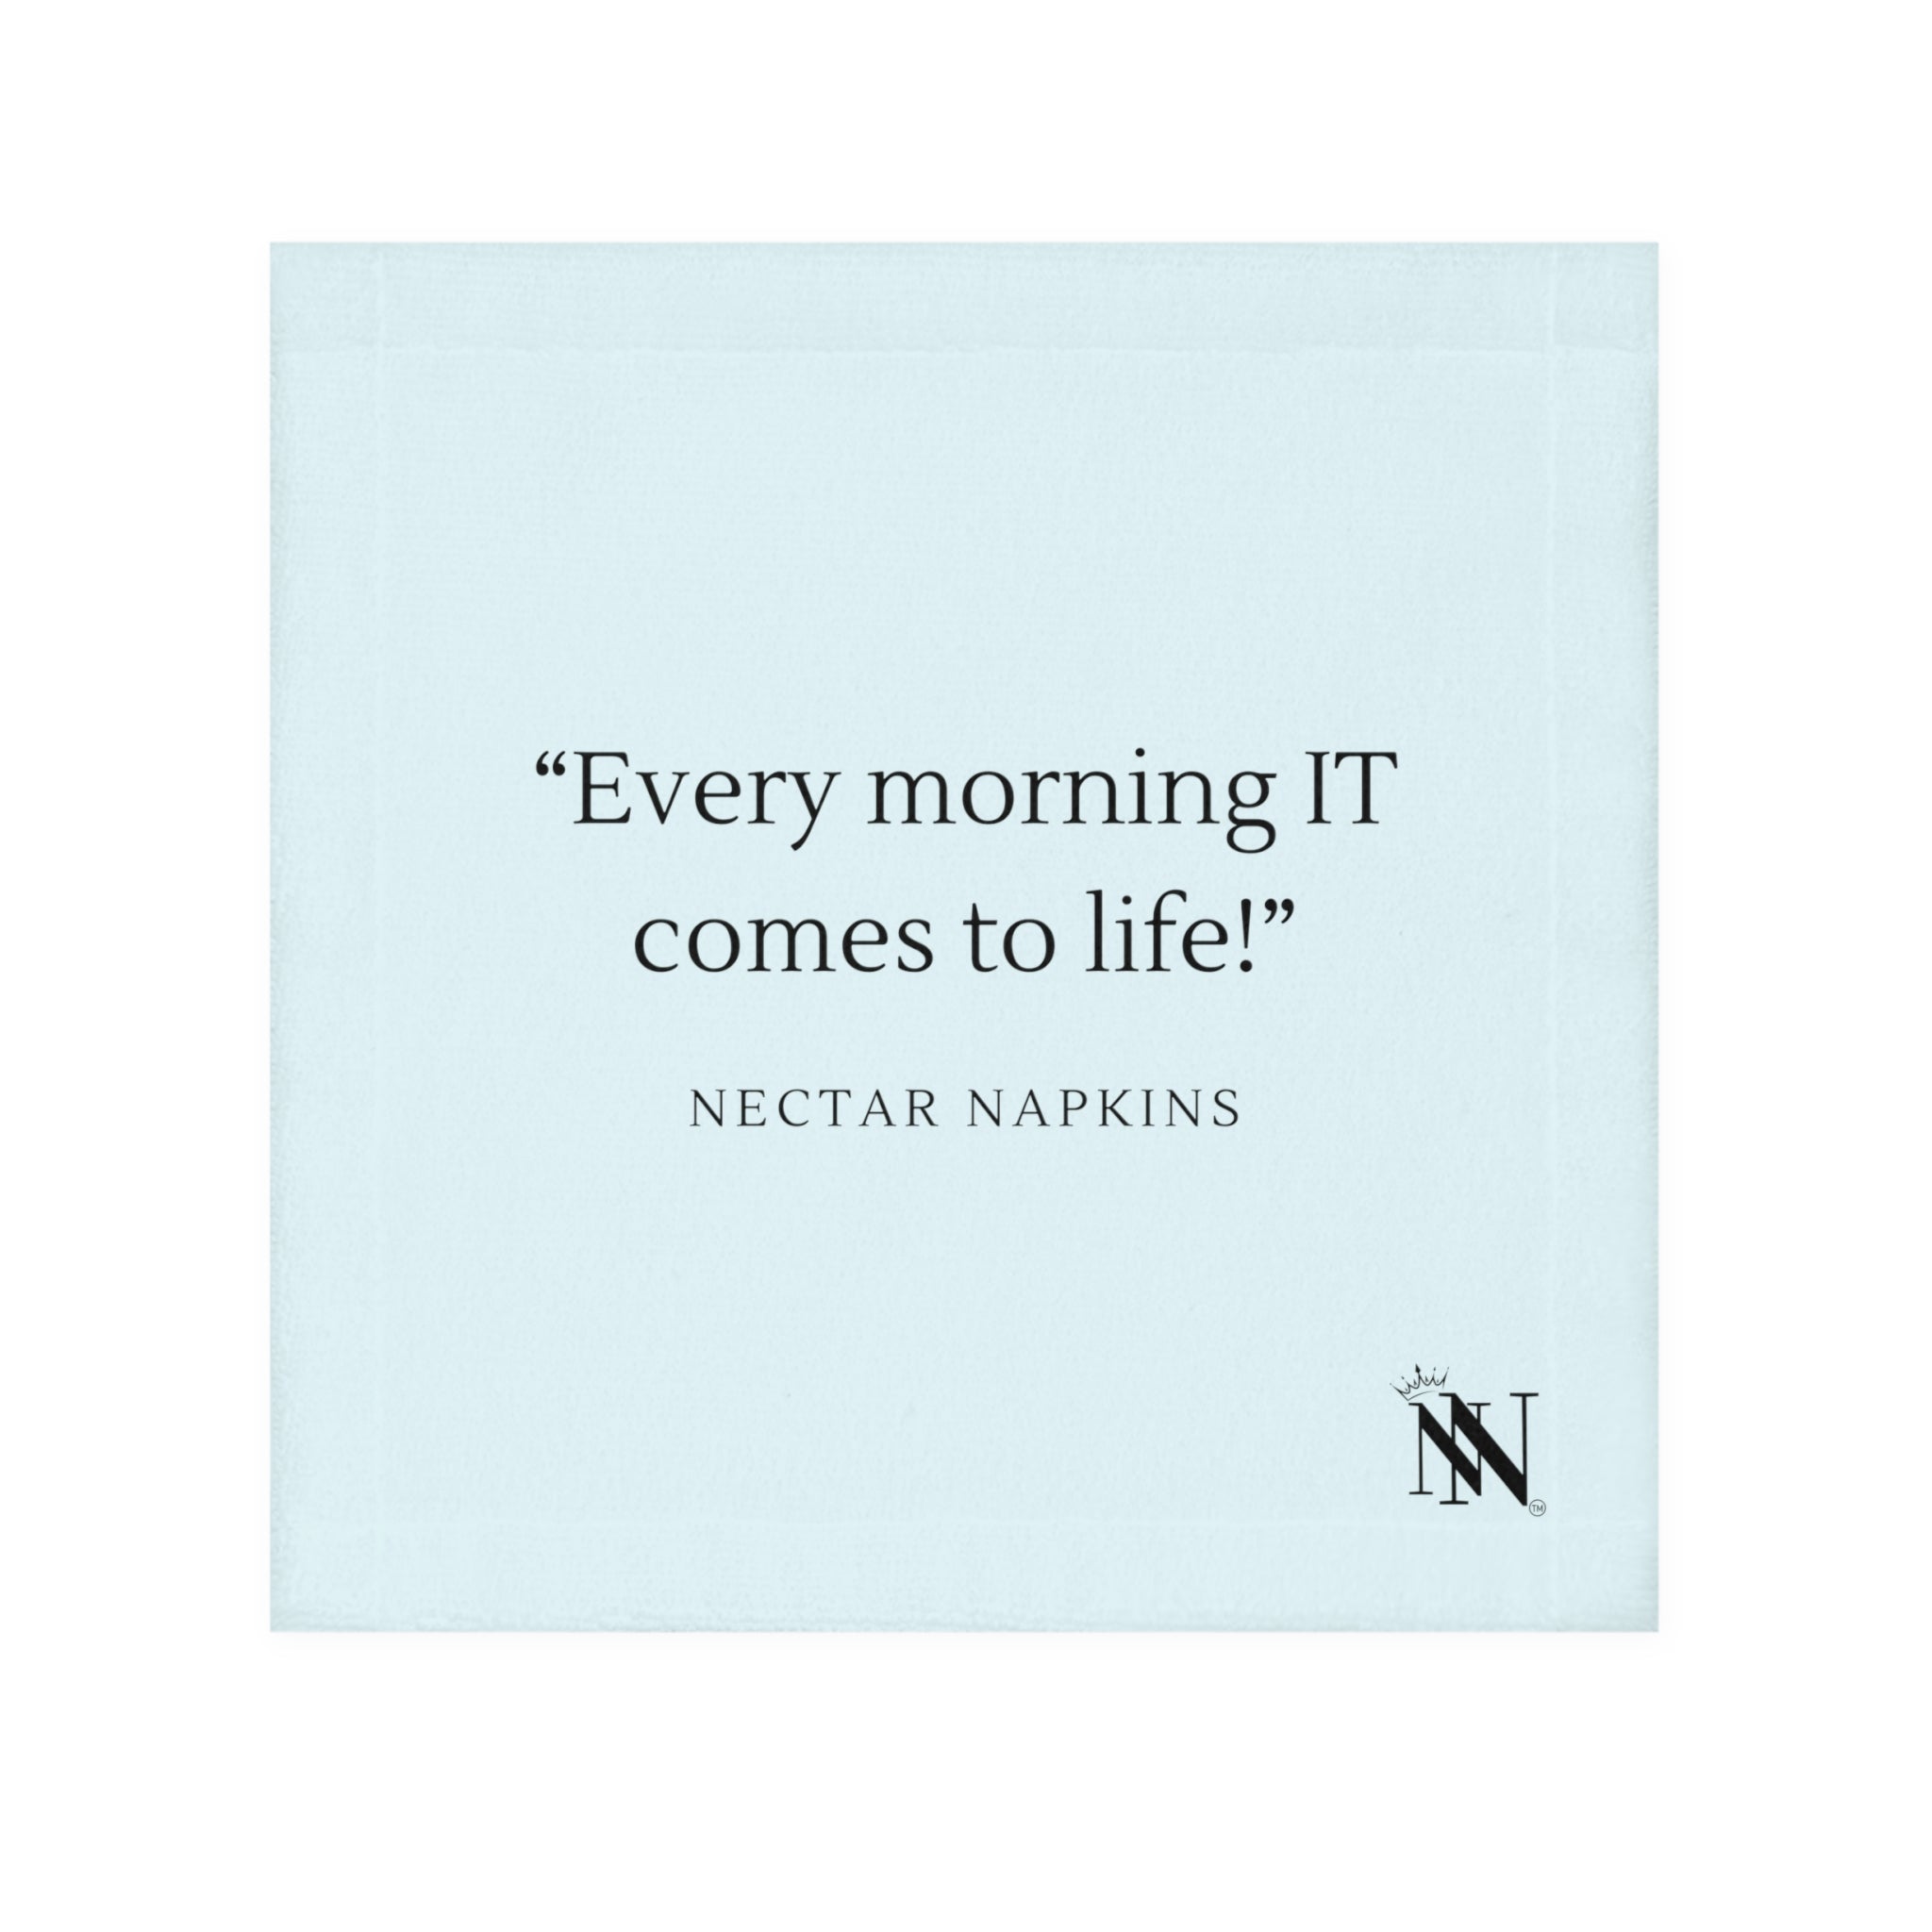 Every morning it comes to life sex towel